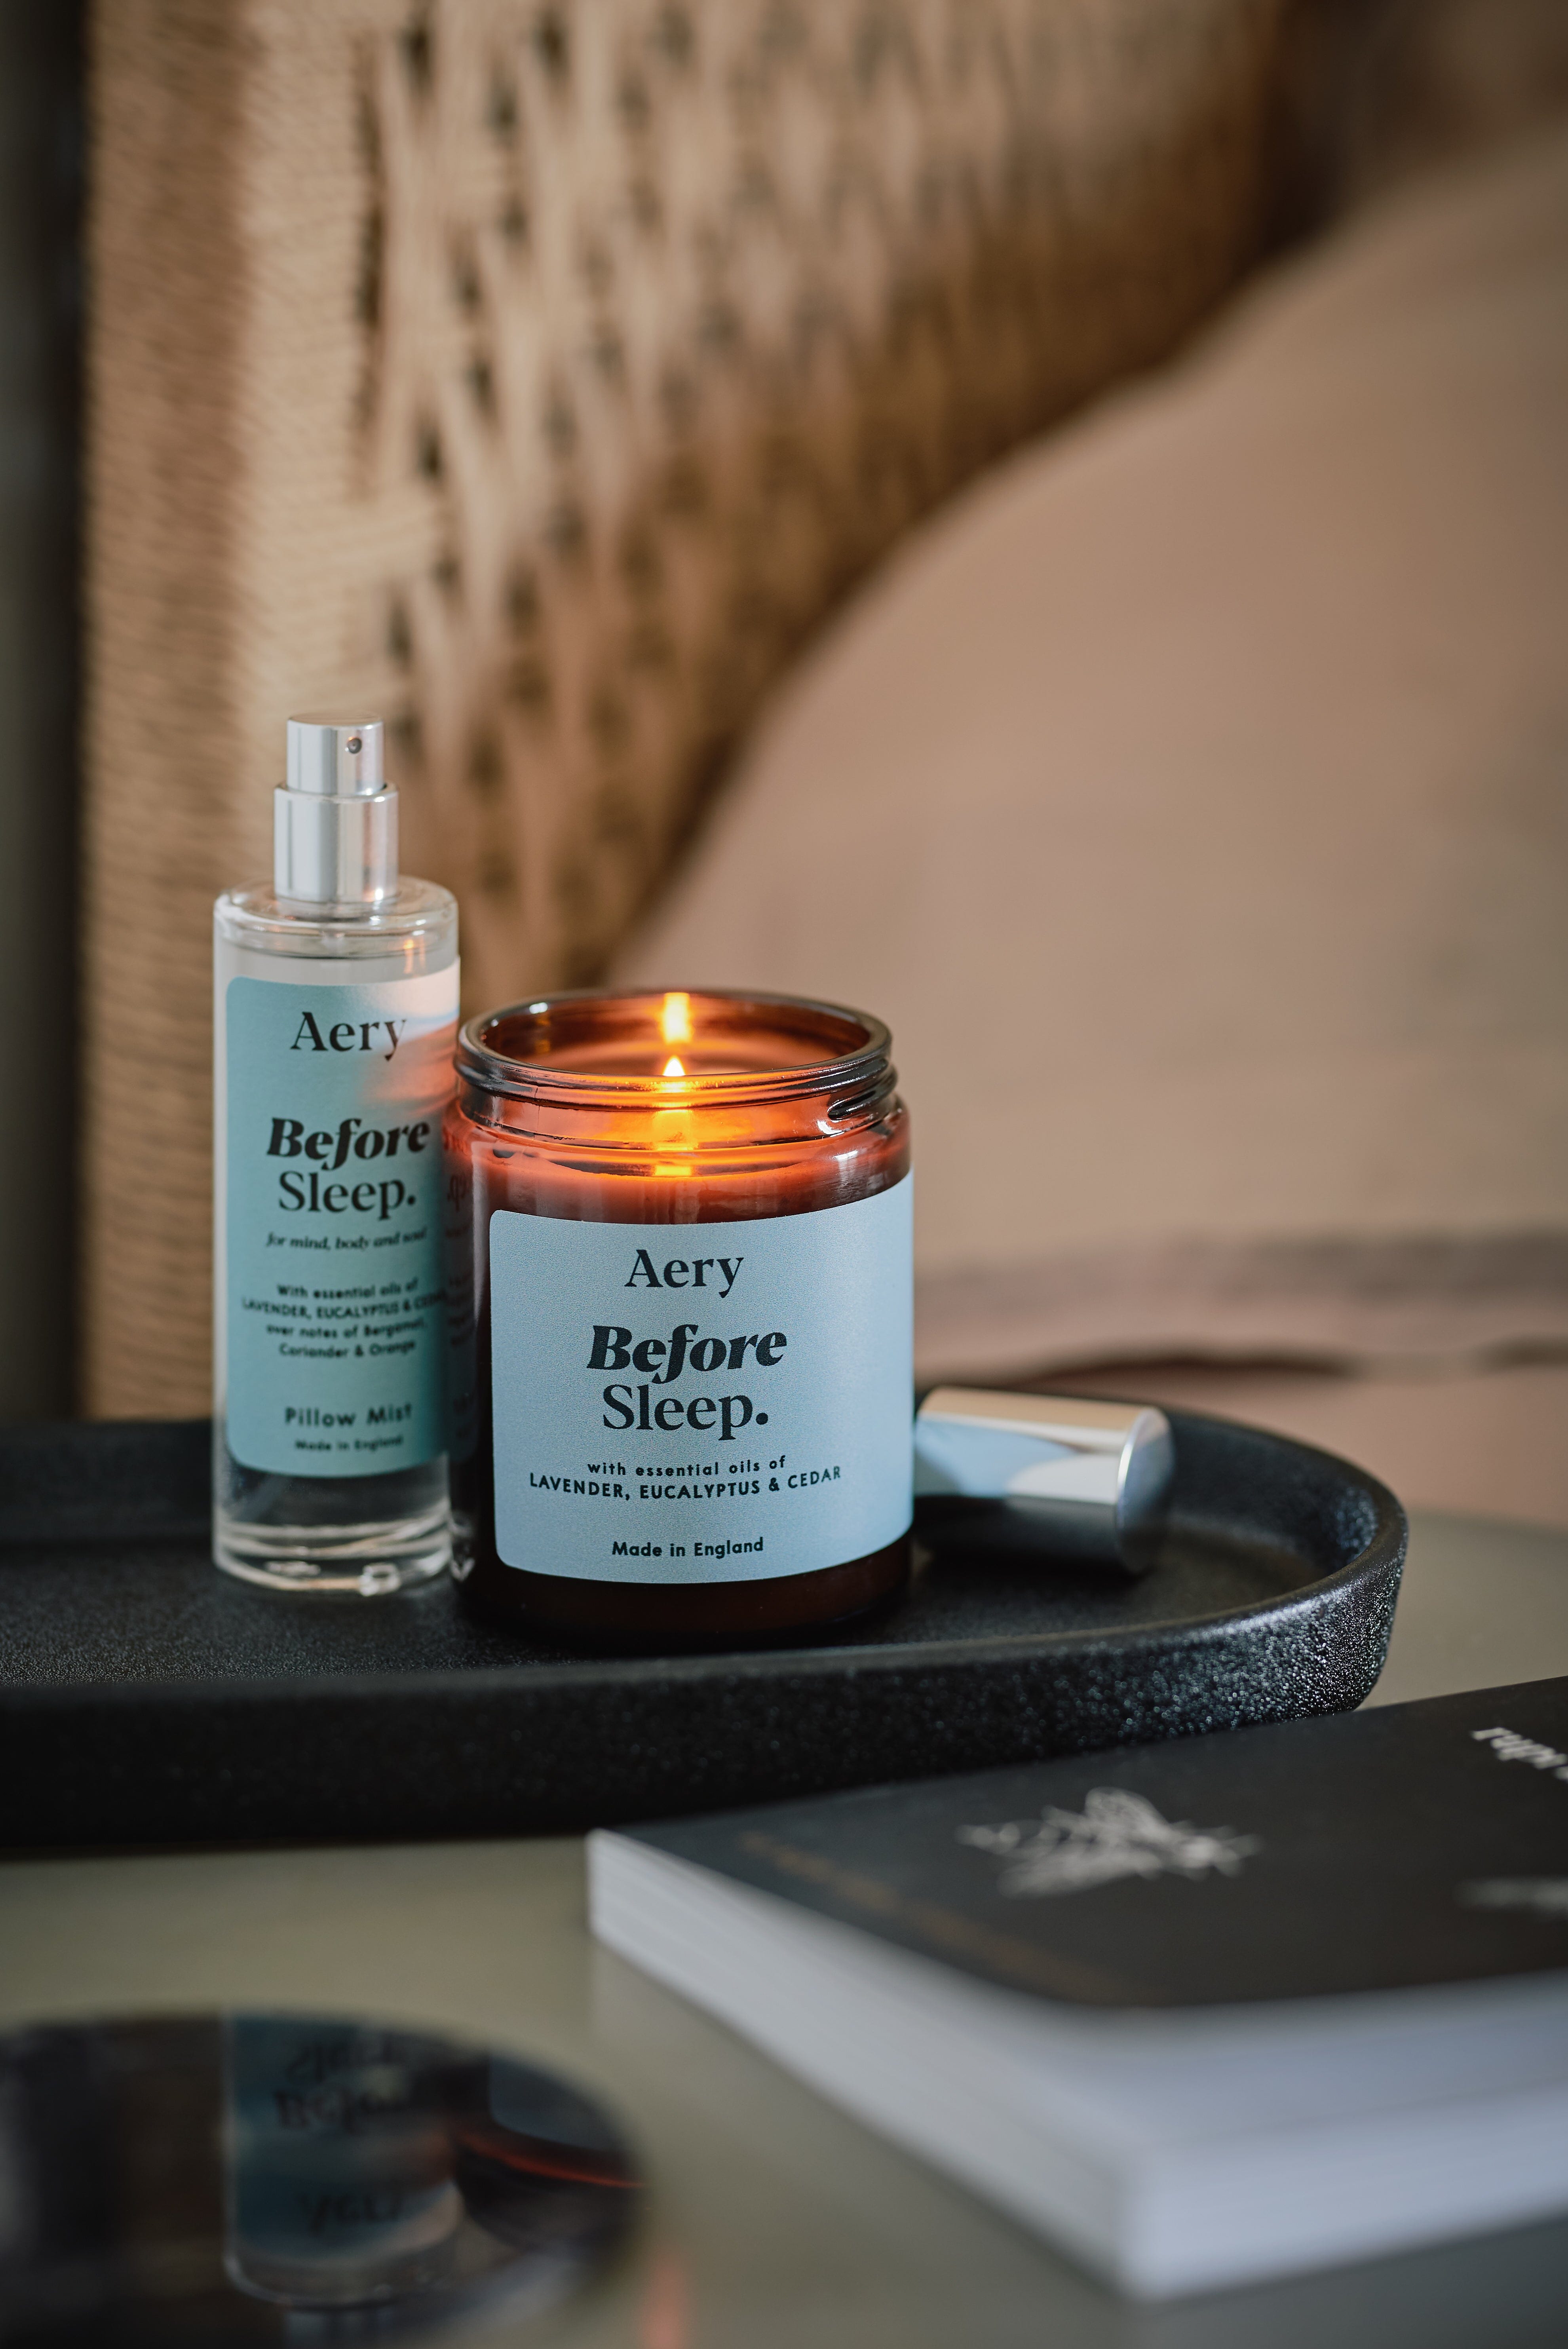 Blue Before Sleep jar candle by Aery displayed next to Before Sleep pillow mist on black tray place on bedside table 